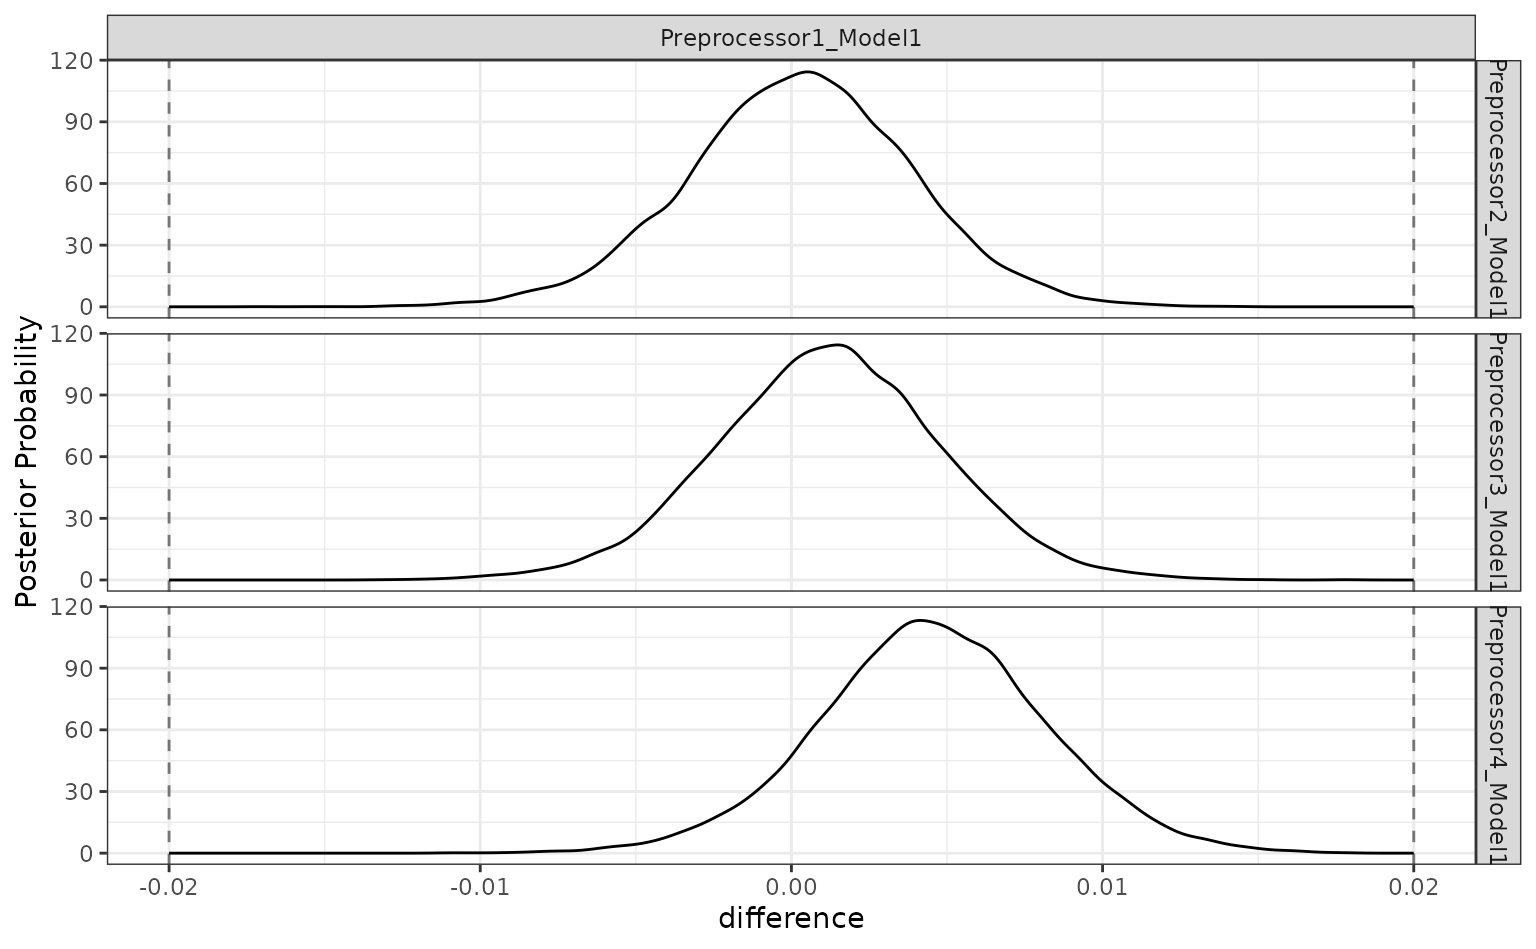 Faceted line chart. difference along the x-axis, posterior probability along the y-axis. Each density corresponds to the difference between preprocessor1 and the other 3 preprocessors. preprocessor2 looks to have a mean around 0, preprocessor3 looks to have a mean around 0.0025, and preprocessor4 looks to have a mean around 0.005. Range is from -0.015 to 0.02. vertical dashed lines placed at -0.02 and 0.02.